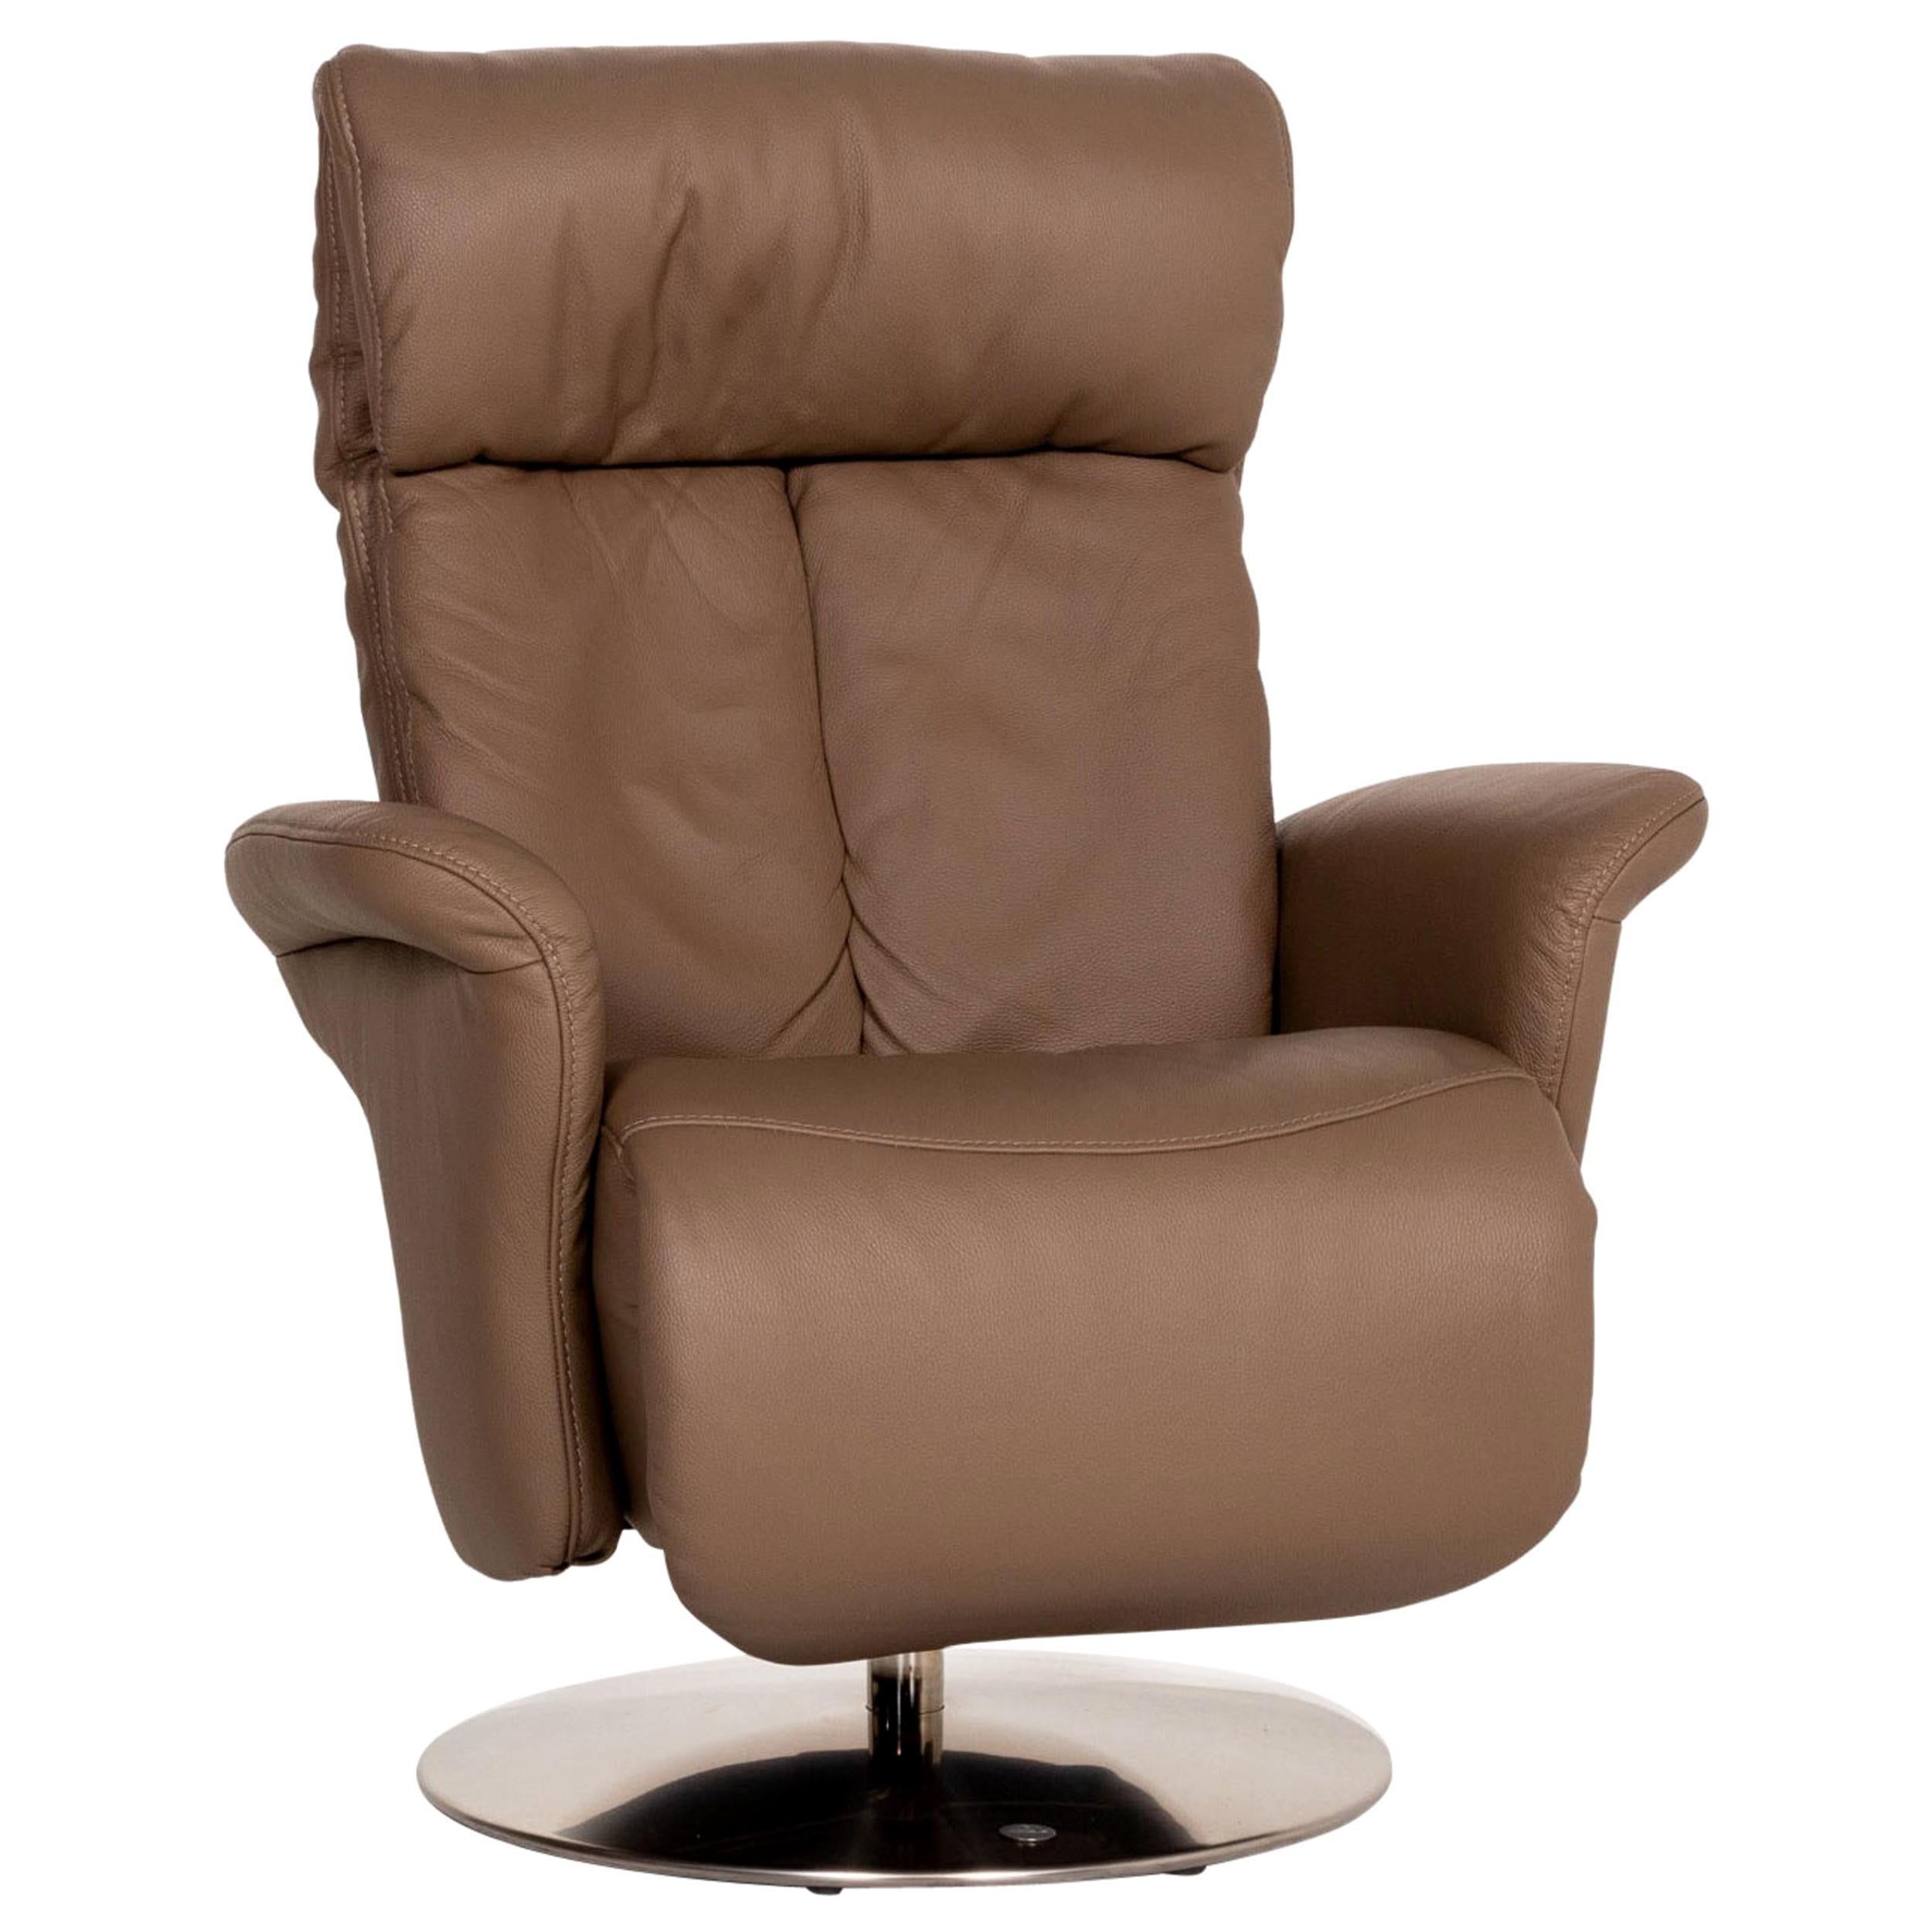 Himolla 7227 Leather Armchair Brown Relaxation Function Function Relaxation For Sale